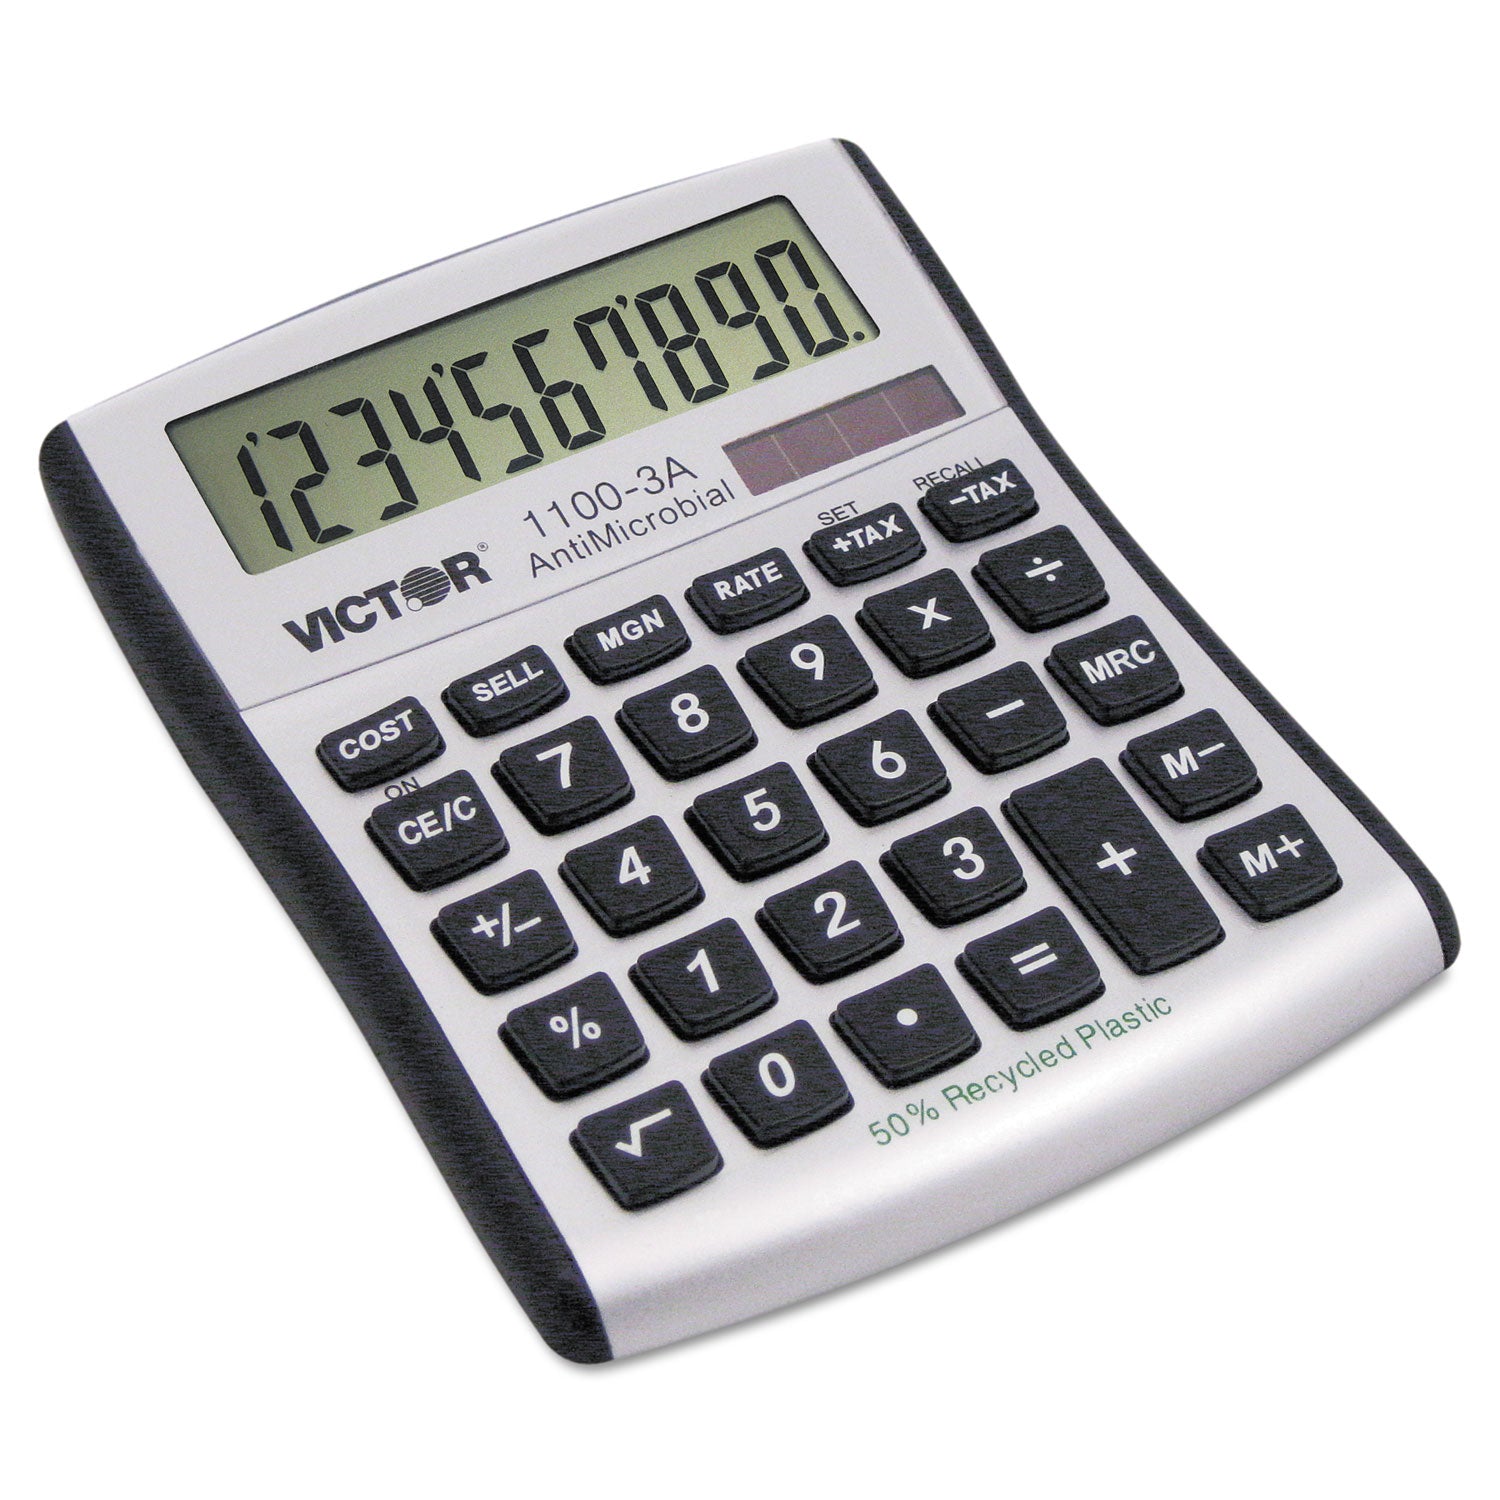 1100-3A Antimicrobial Compact Desktop Calculator, 10-Digit LCD - 